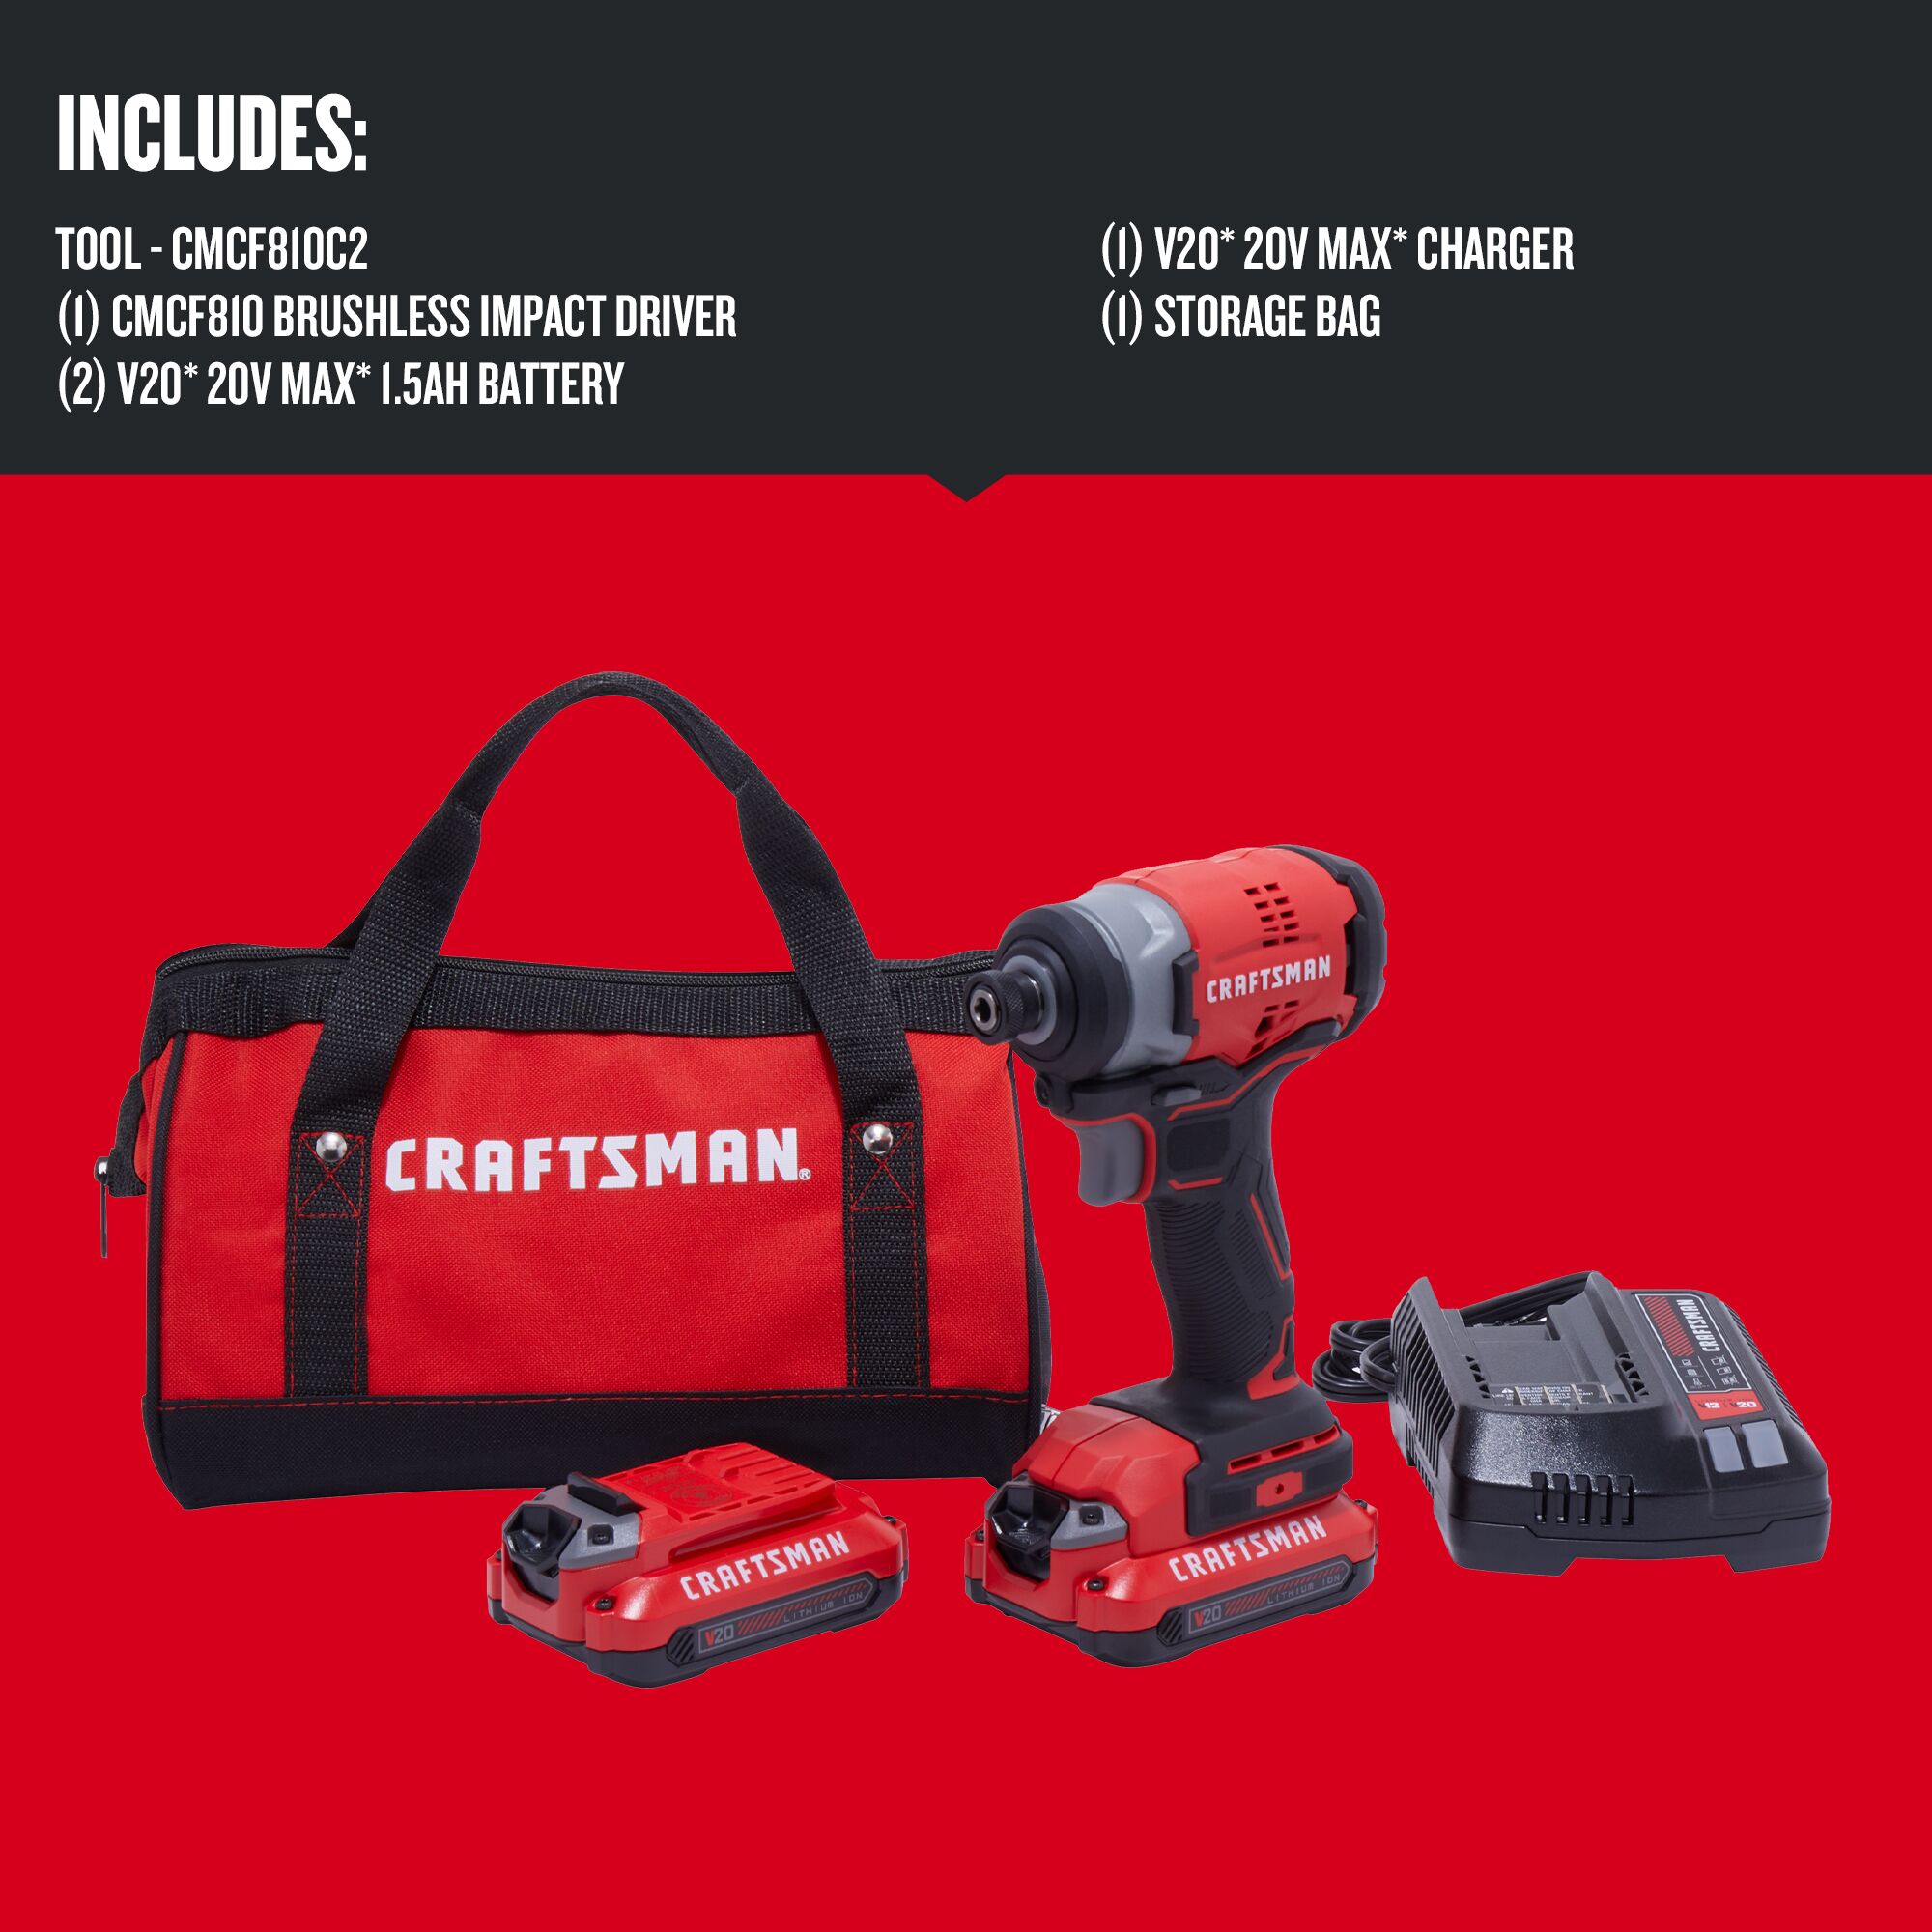 Front view of Craftsman 20V Max ¼ in. Brushless Cordless Impact Driver Kit with 2 Batteries showing one CMCF810 brushless impact driver, two V20* 20V MAX* 1.5AH Batteries, one V20* 20V MAX* charger and one storage bag.